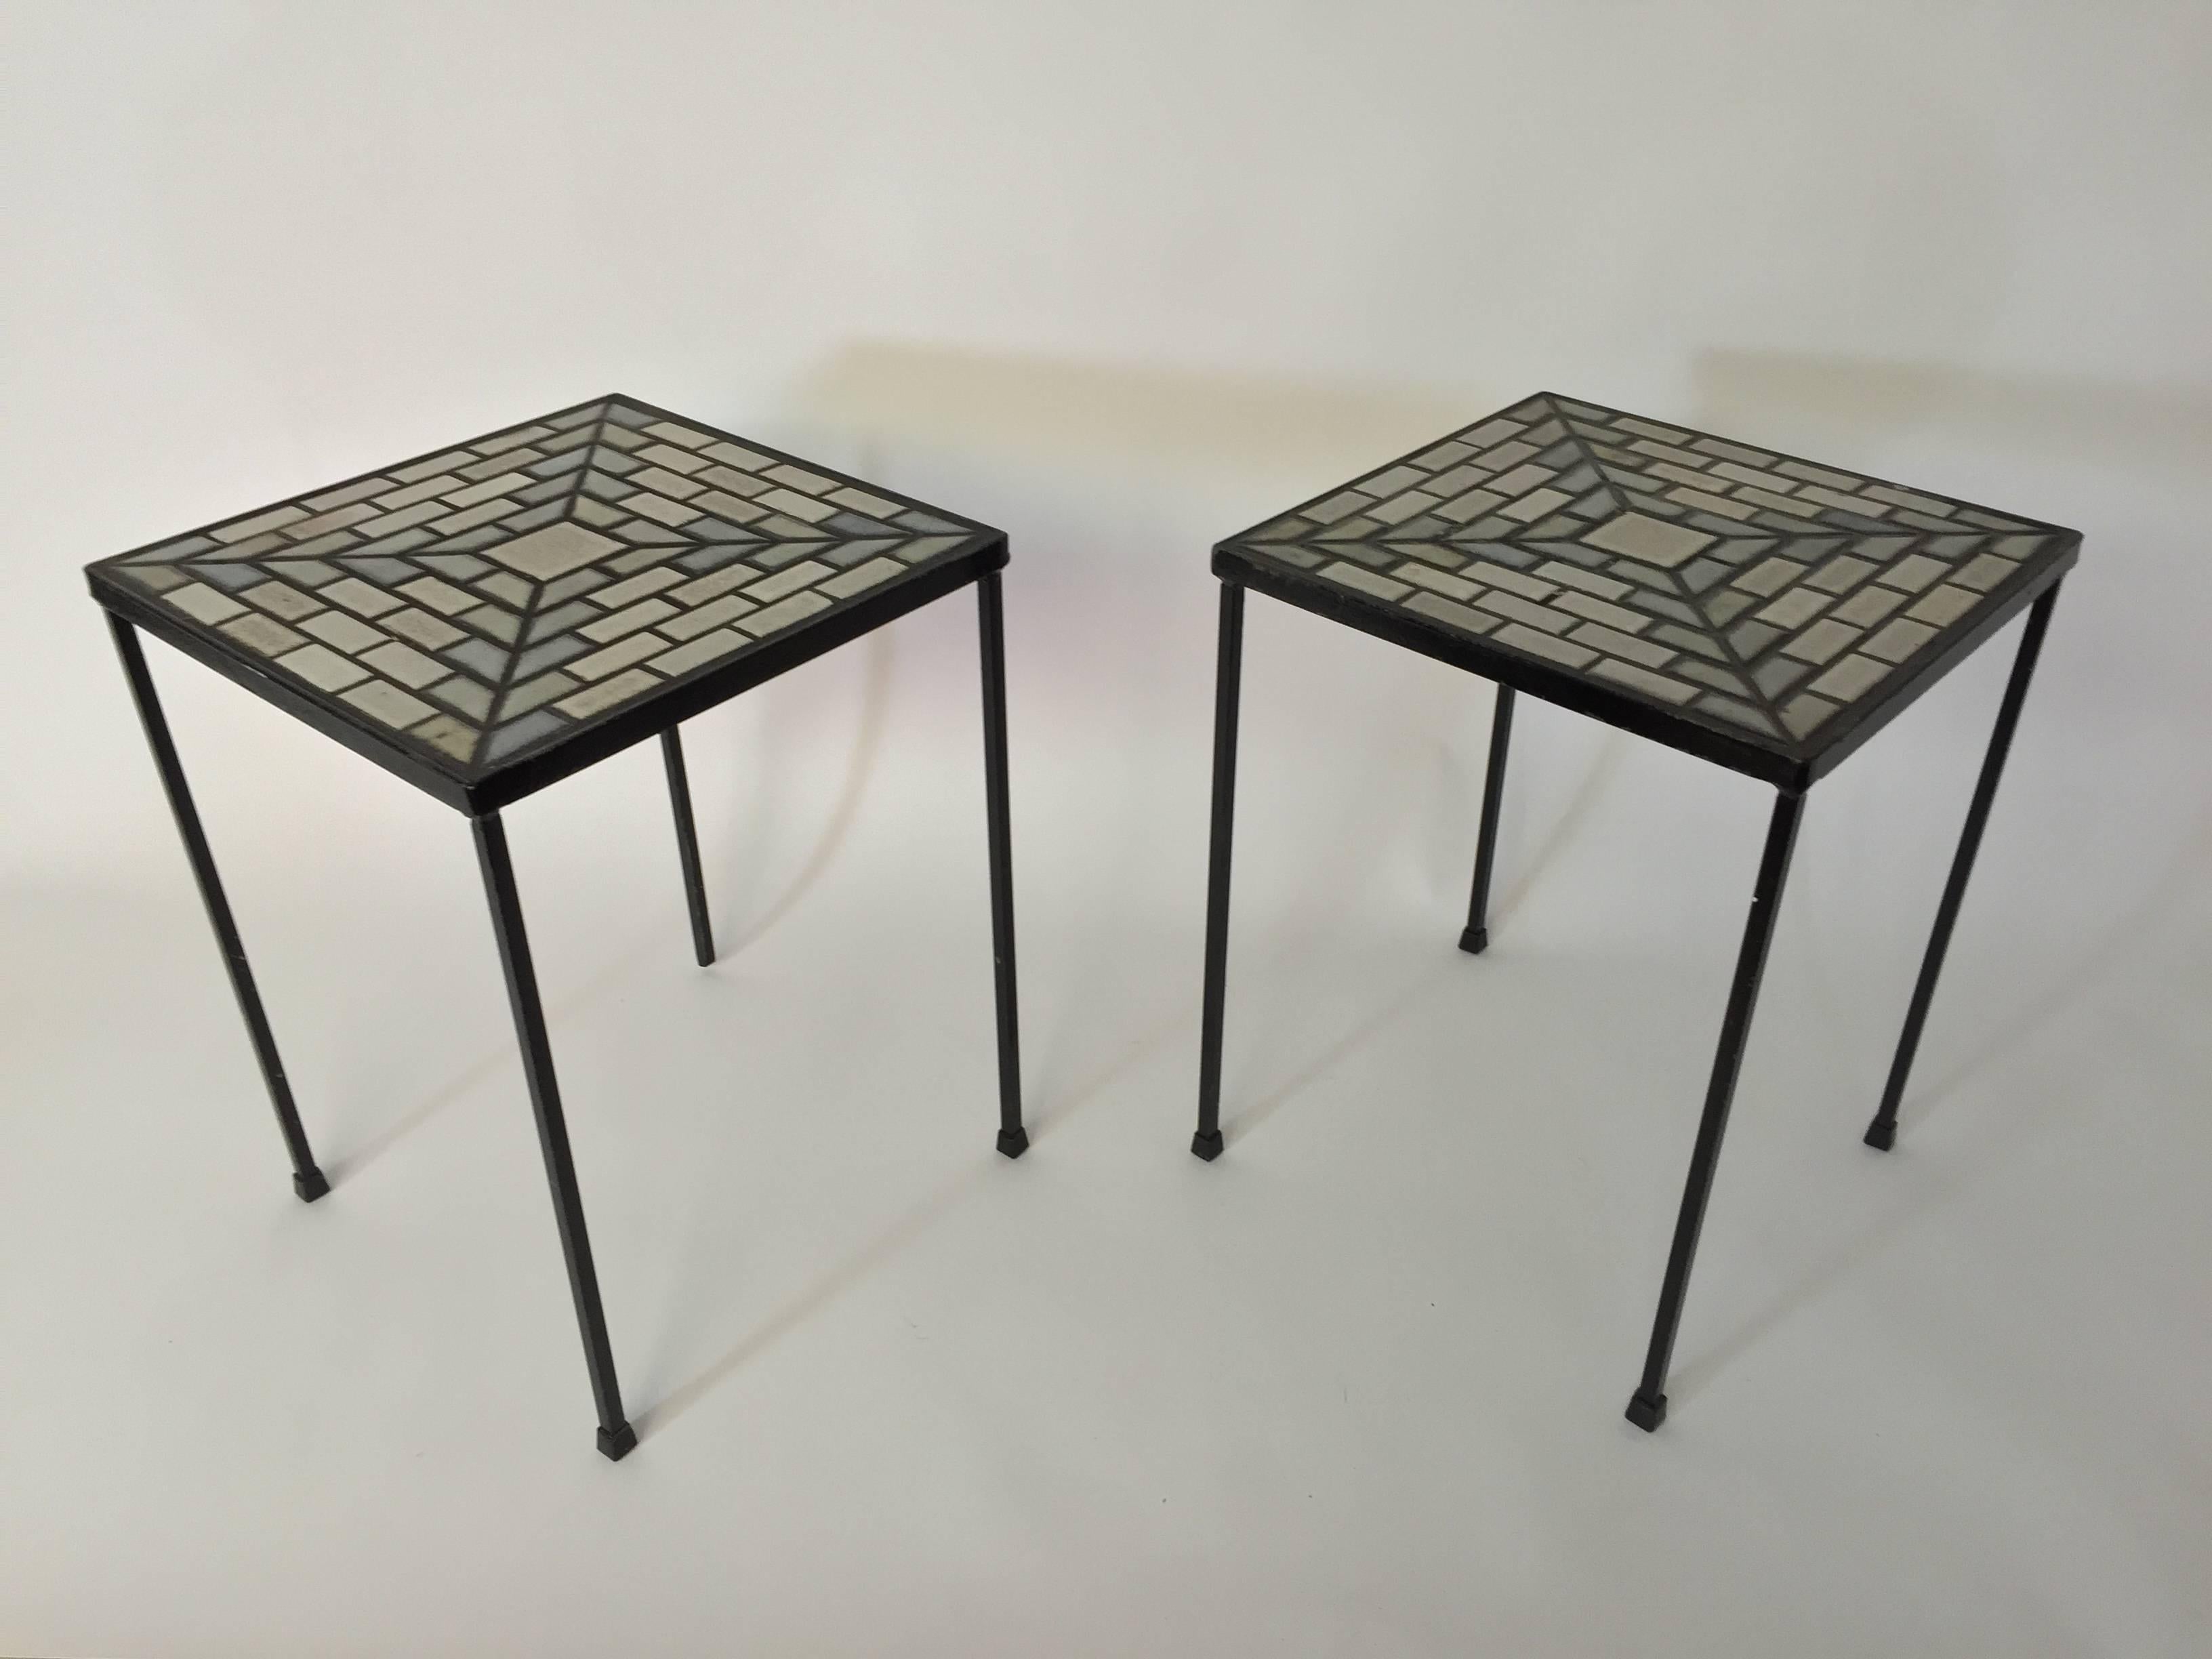 American Pair of Iron and Tile Top End Tables in the Style of Martz